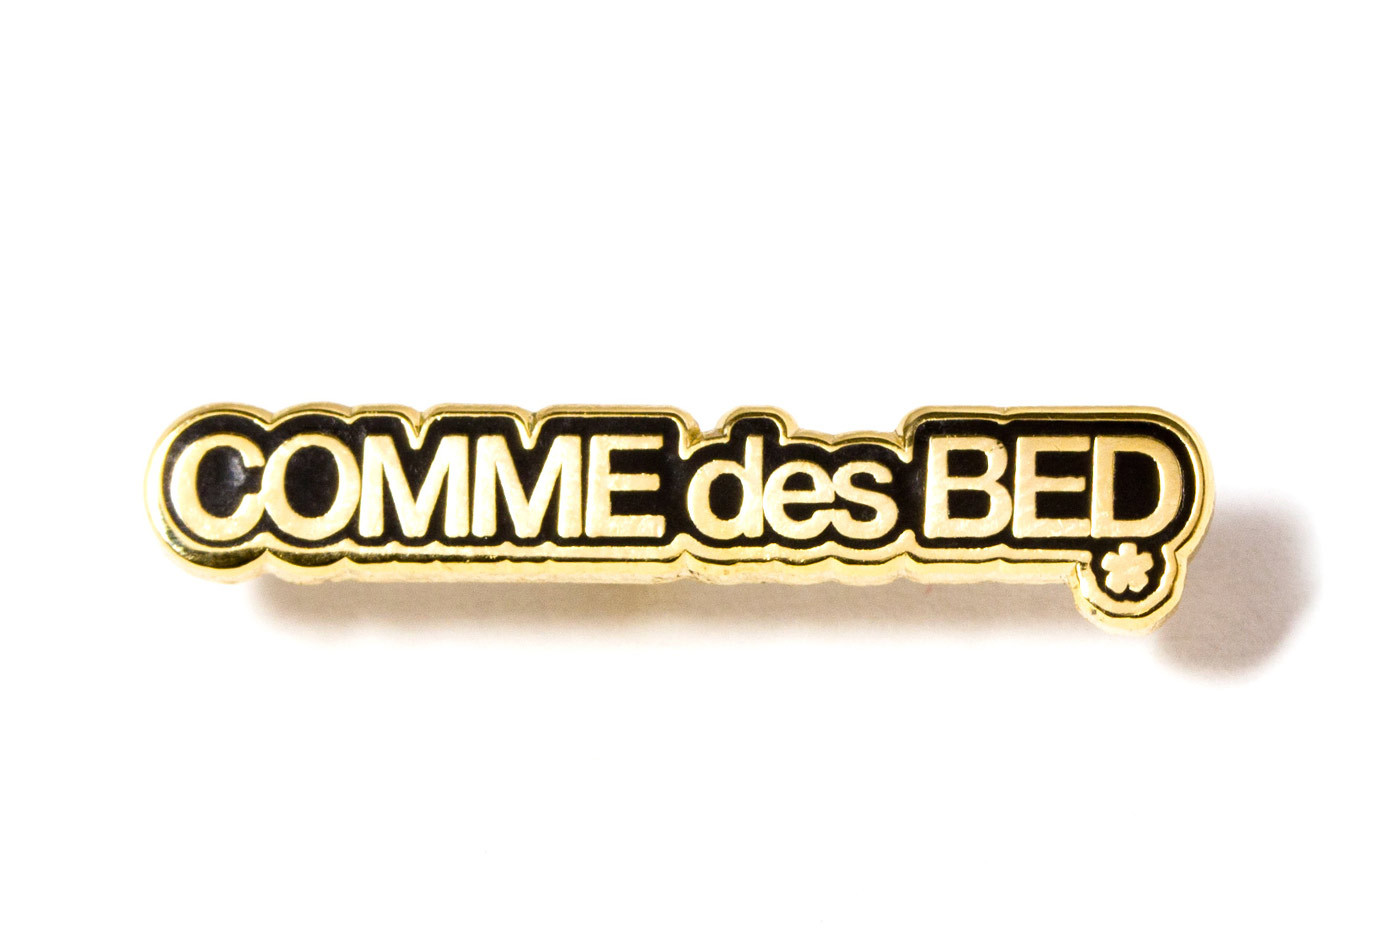 http://www.pintrill.com/collections/homepage-collection/products/comme-des-bed-pin-black-and-gold?variant=15252358596